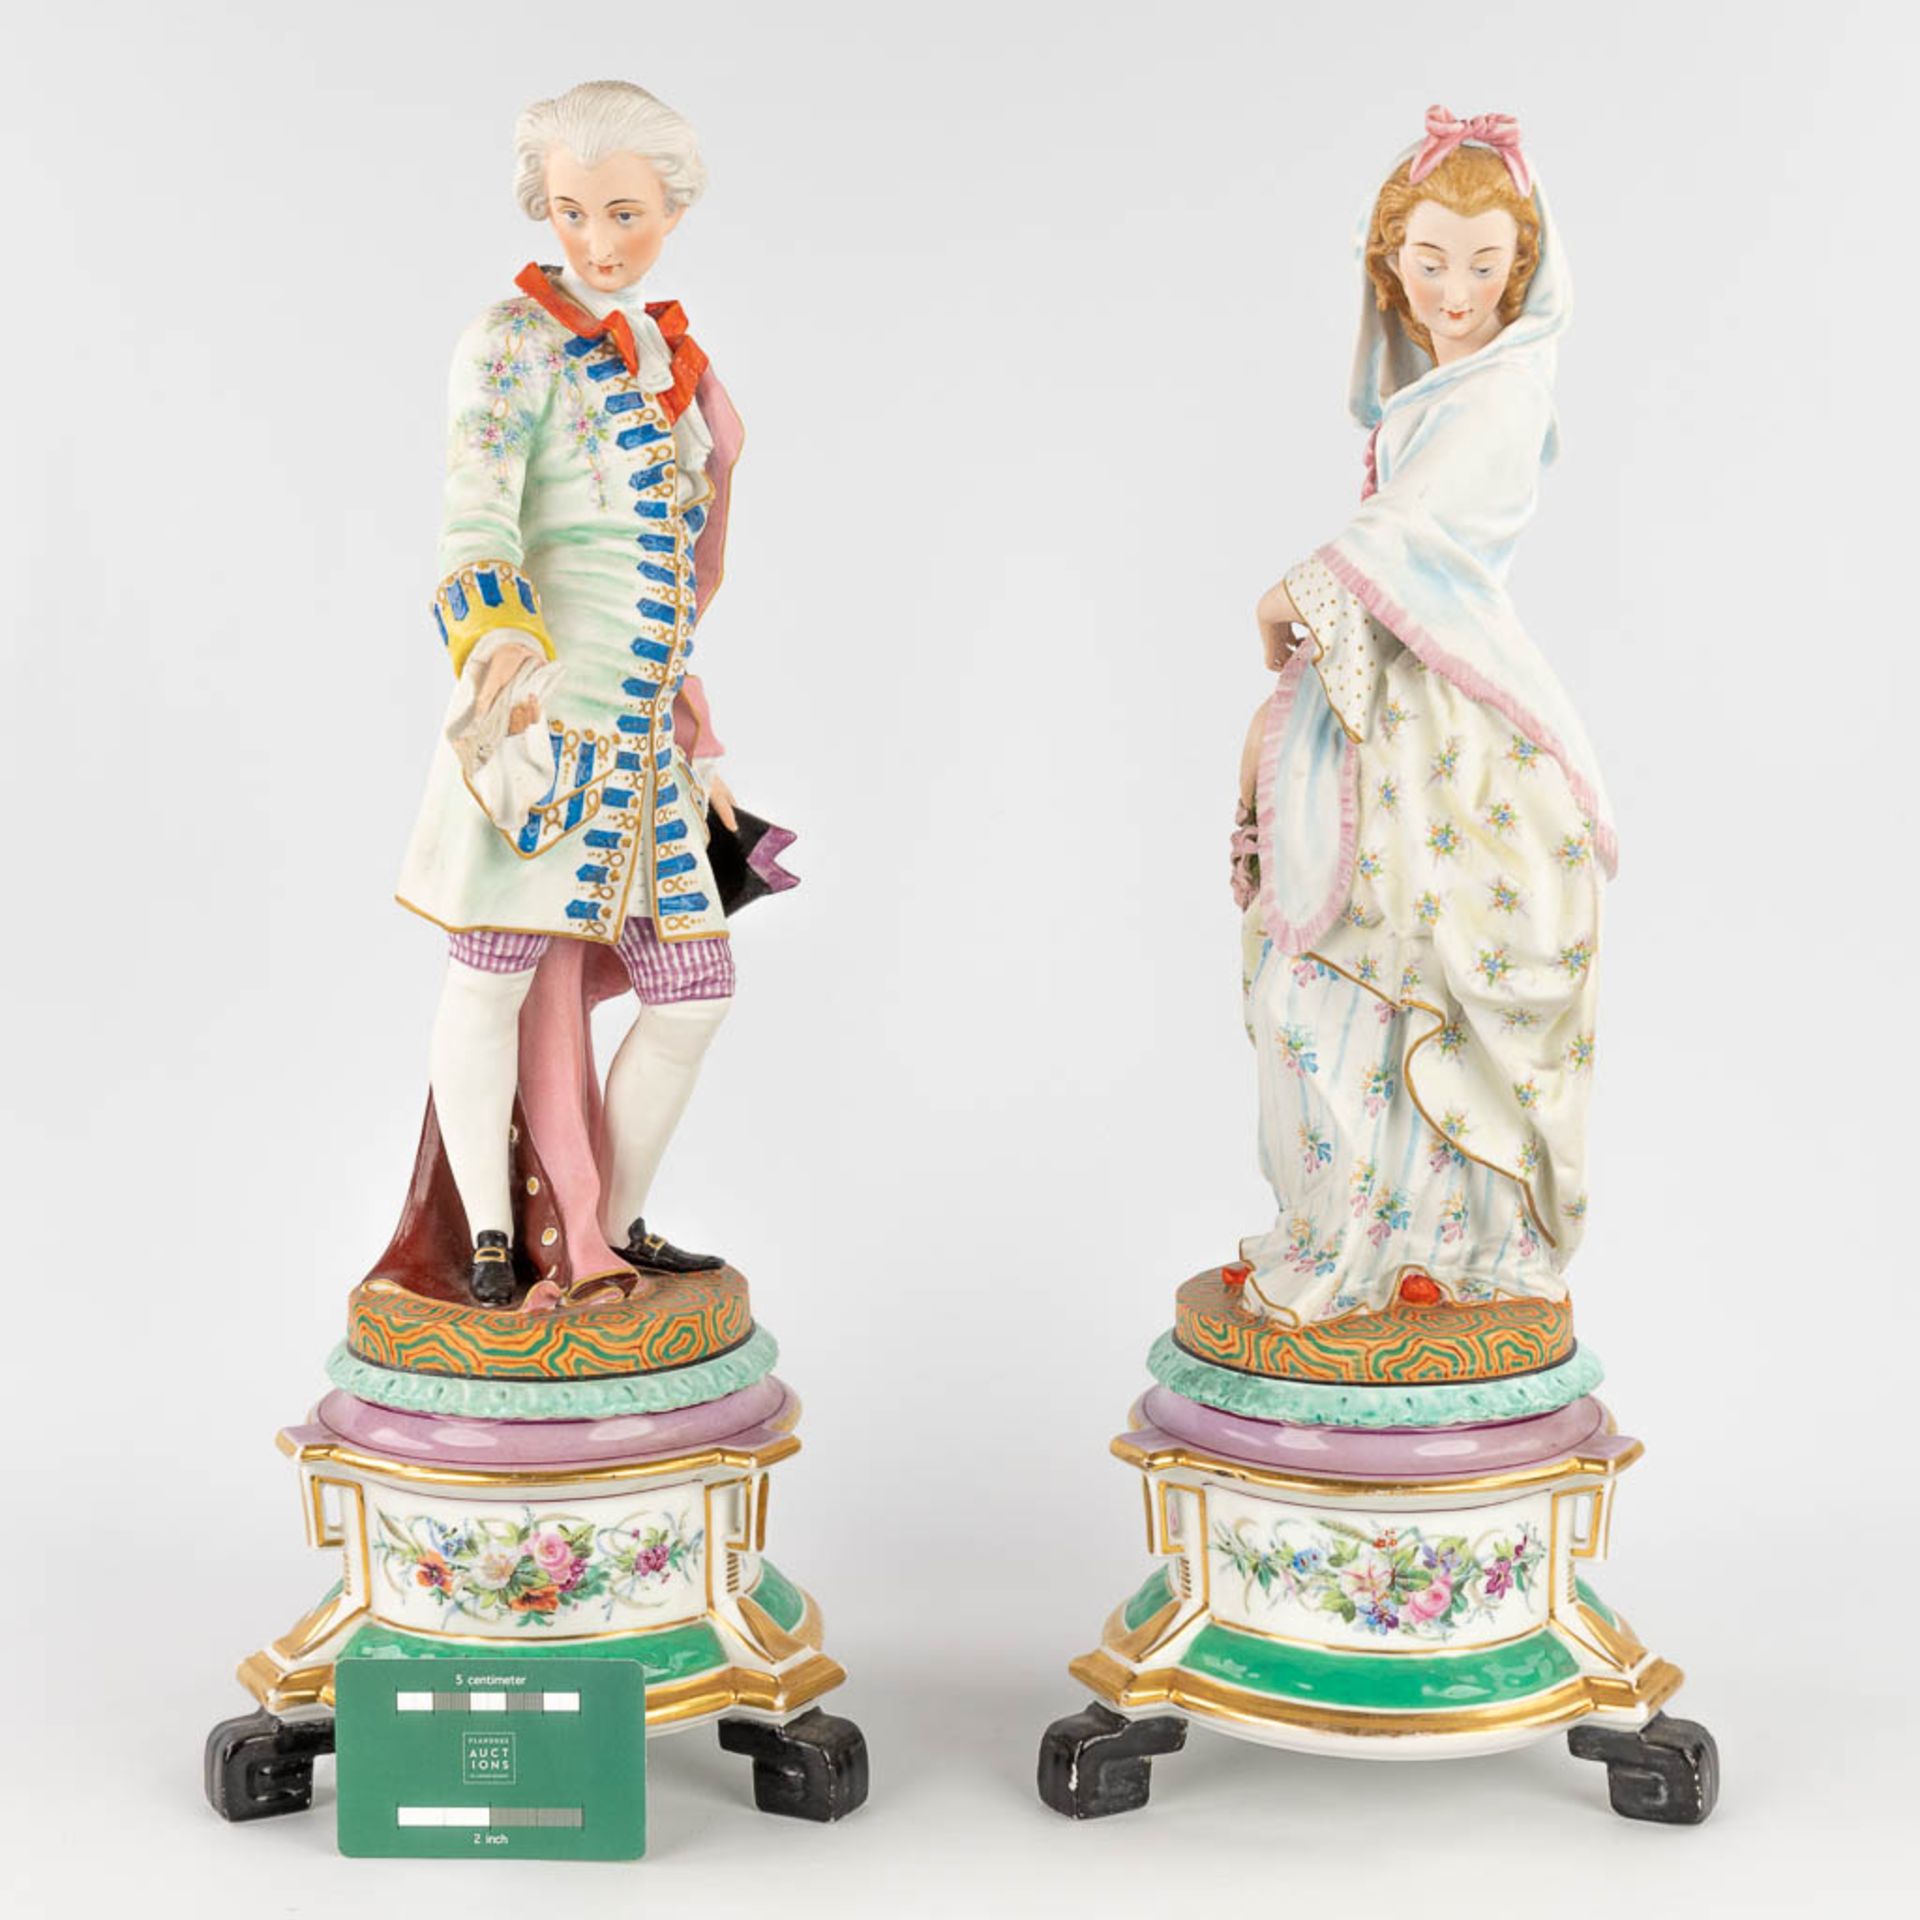 A pair of antique bisque figurines, standing on a glazed porcelain base. (L: 18 x W: 18 x H: 49 cm) - Image 2 of 24